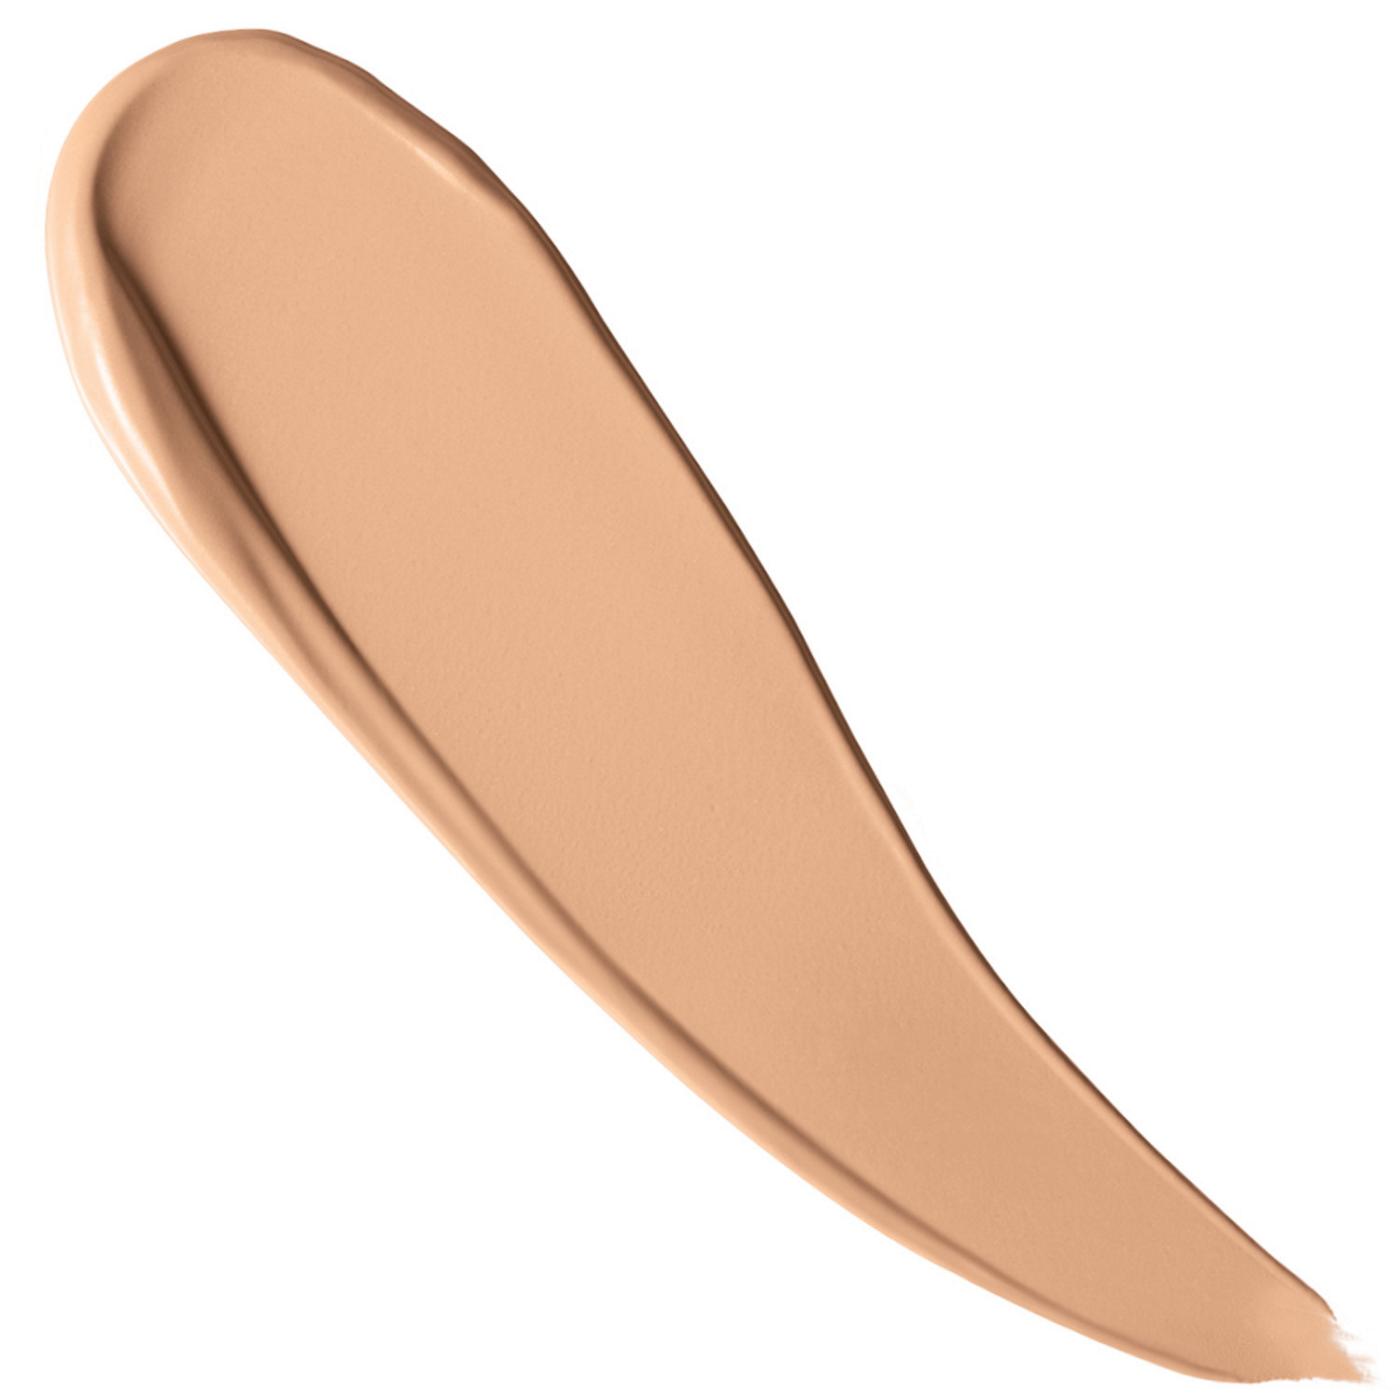 Covergirl Simply Ageless 3-in-1 Liquid Foundation 255 Soft Honey; image 5 of 6